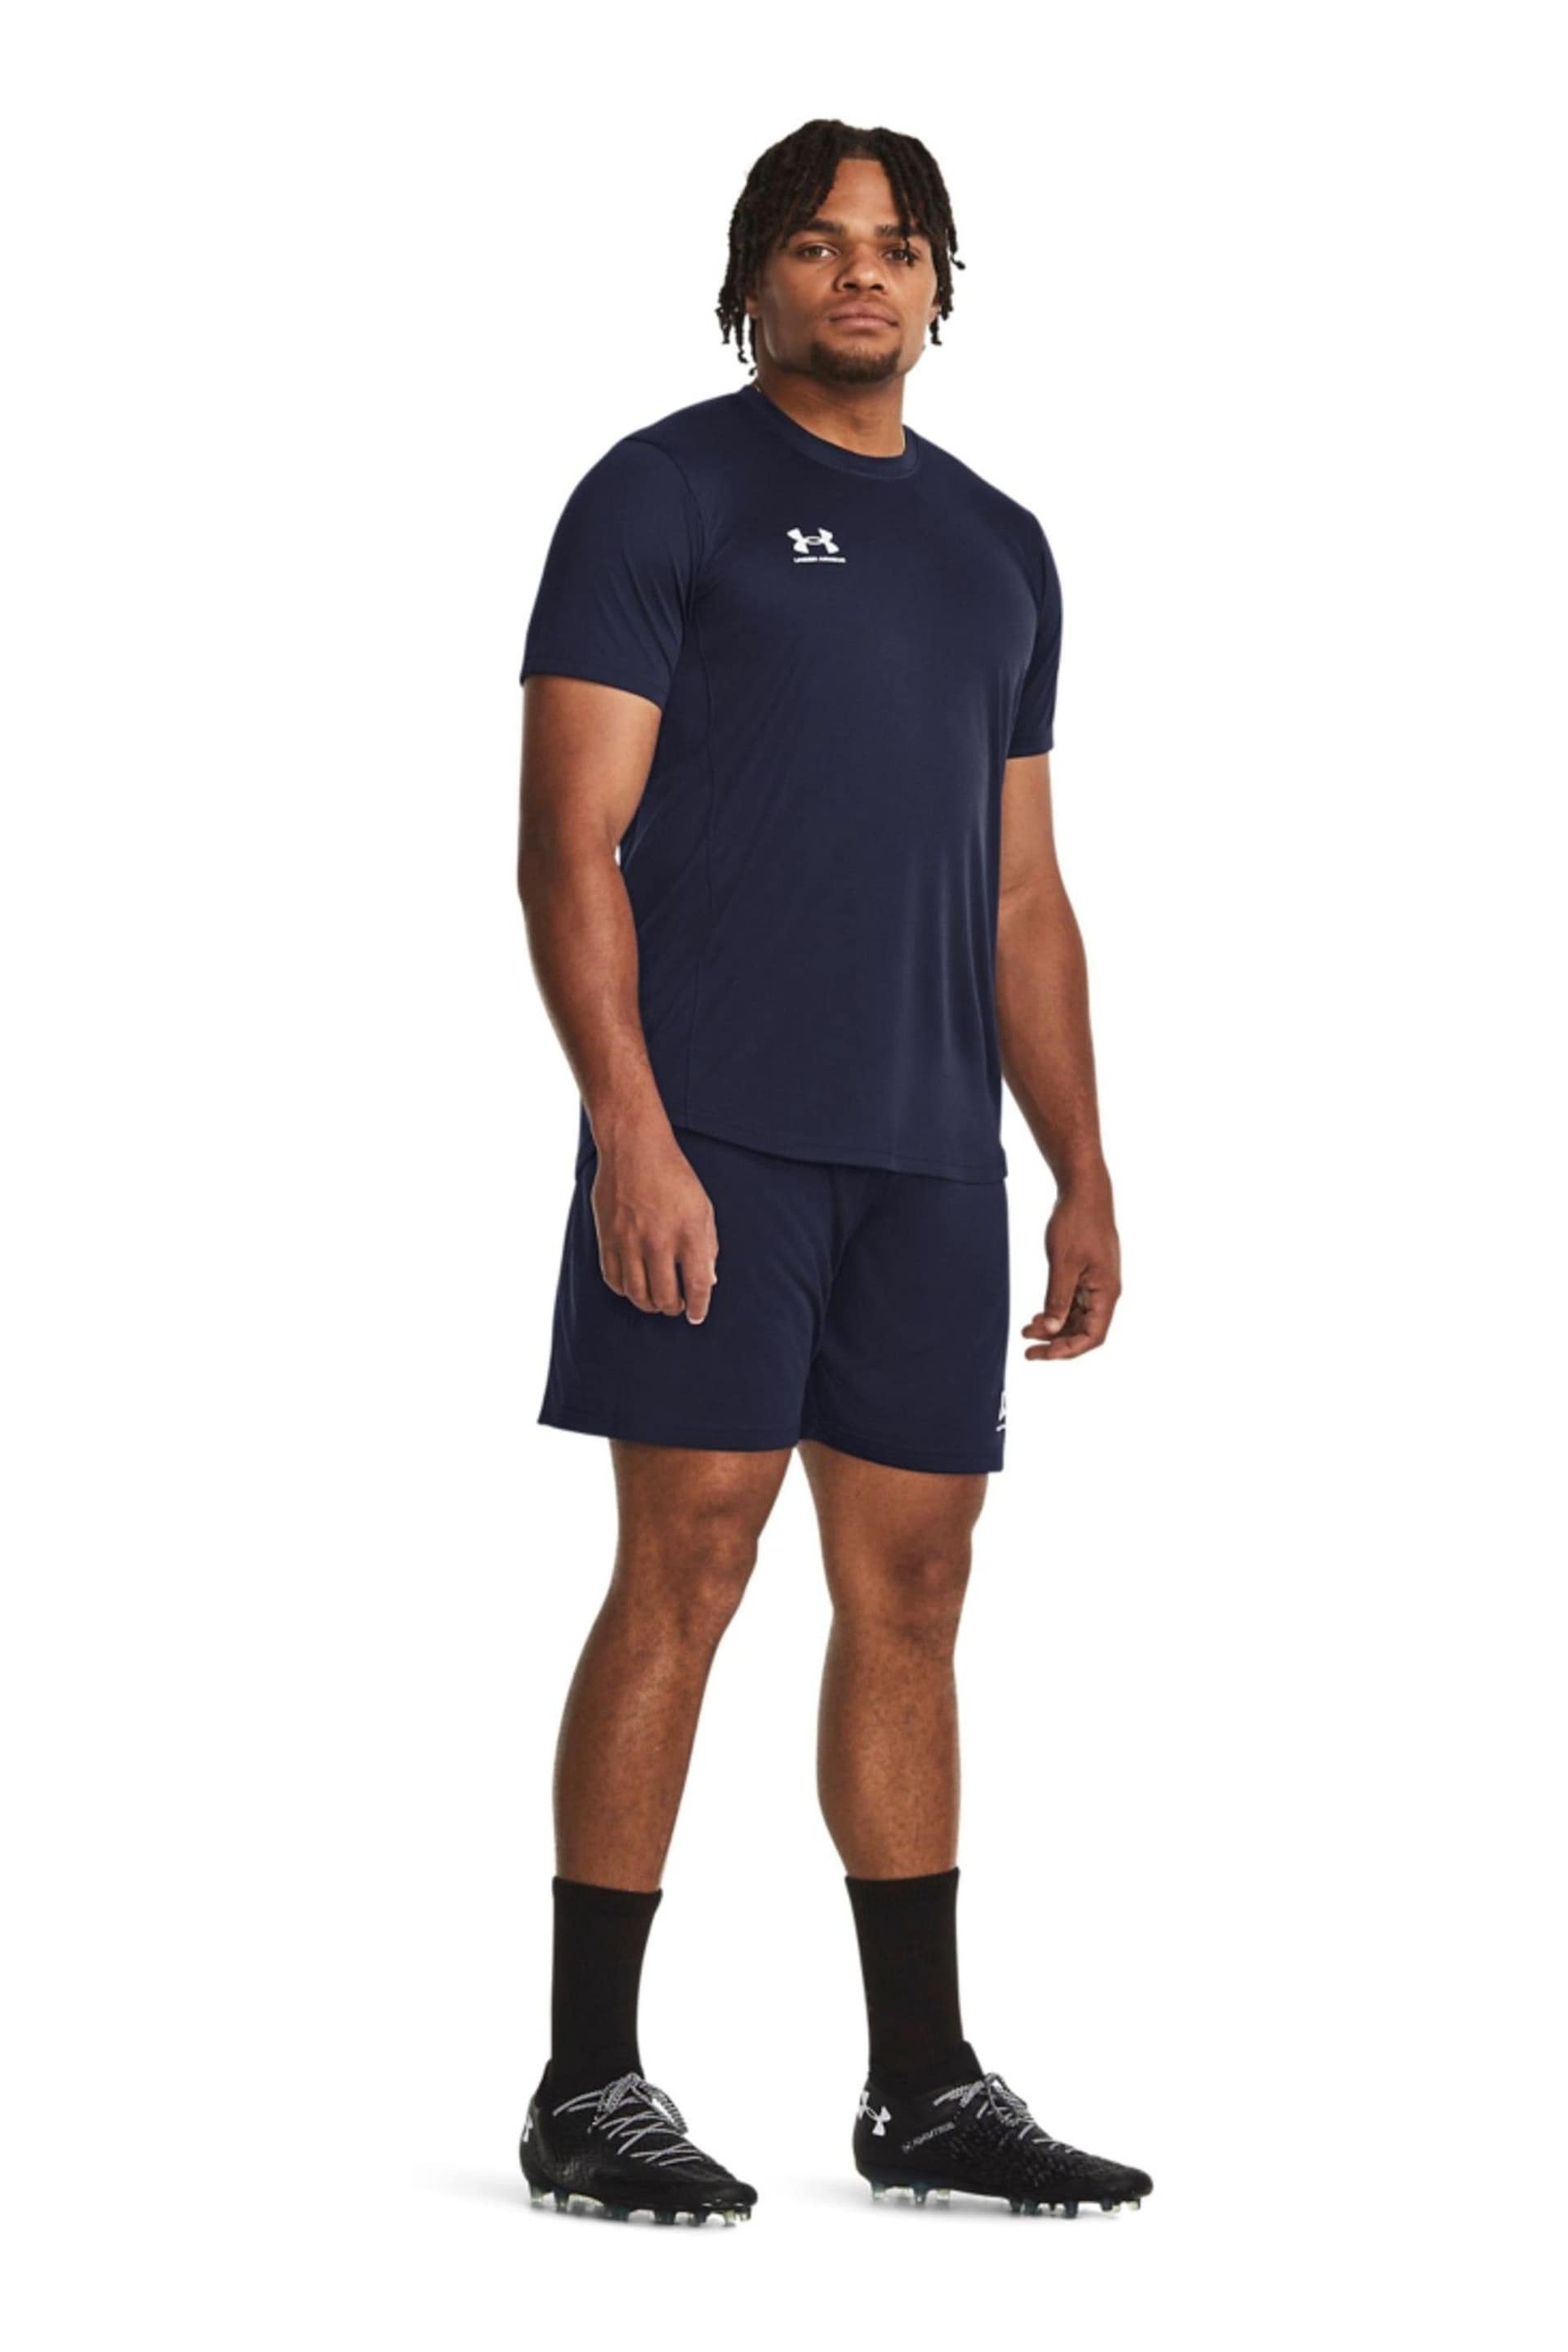 Under Armour Blue Challenger Knit Shorts - Image 3 of 6